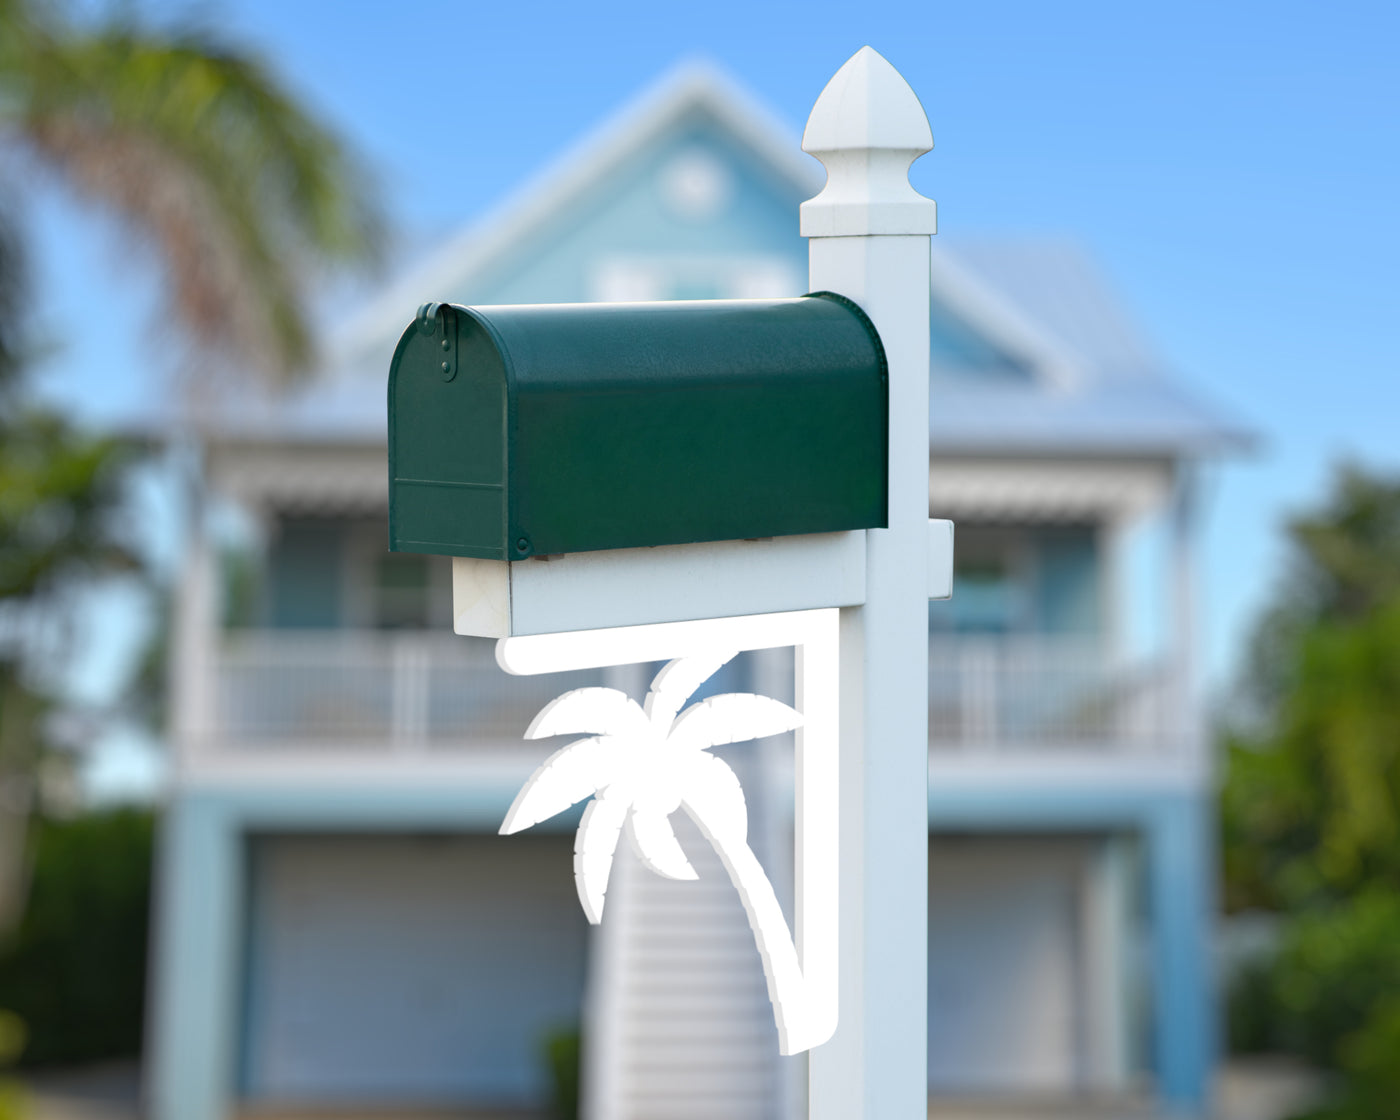 Plastic Palm Tree Mailbox Bracket - Madison Iron and Wood - Mailbox Post Decor - metal outdoor decor - Steel deocrations - american made products - veteran owned business products - fencing decorations - fencing supplies - custom wall decorations - personalized wall signs - steel - decorative post caps - steel post caps - metal post caps - brackets - structural brackets - home improvement - easter - easter decorations - easter gift - easter yard decor